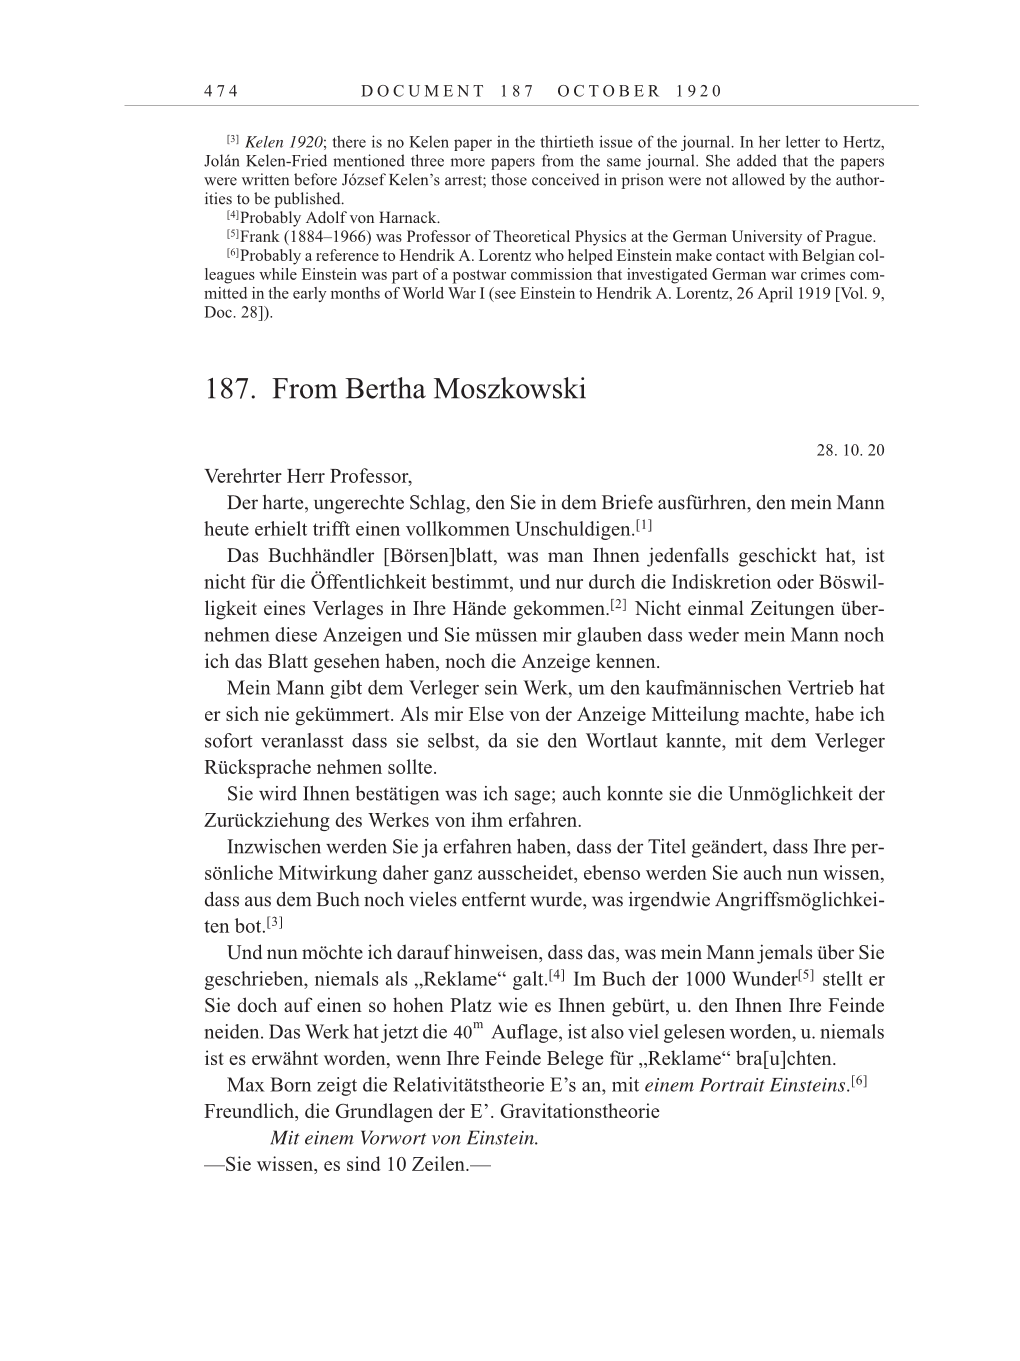 Volume 10: The Berlin Years: Correspondence May-December 1920 / Supplementary Correspondence 1909-1920 page 474